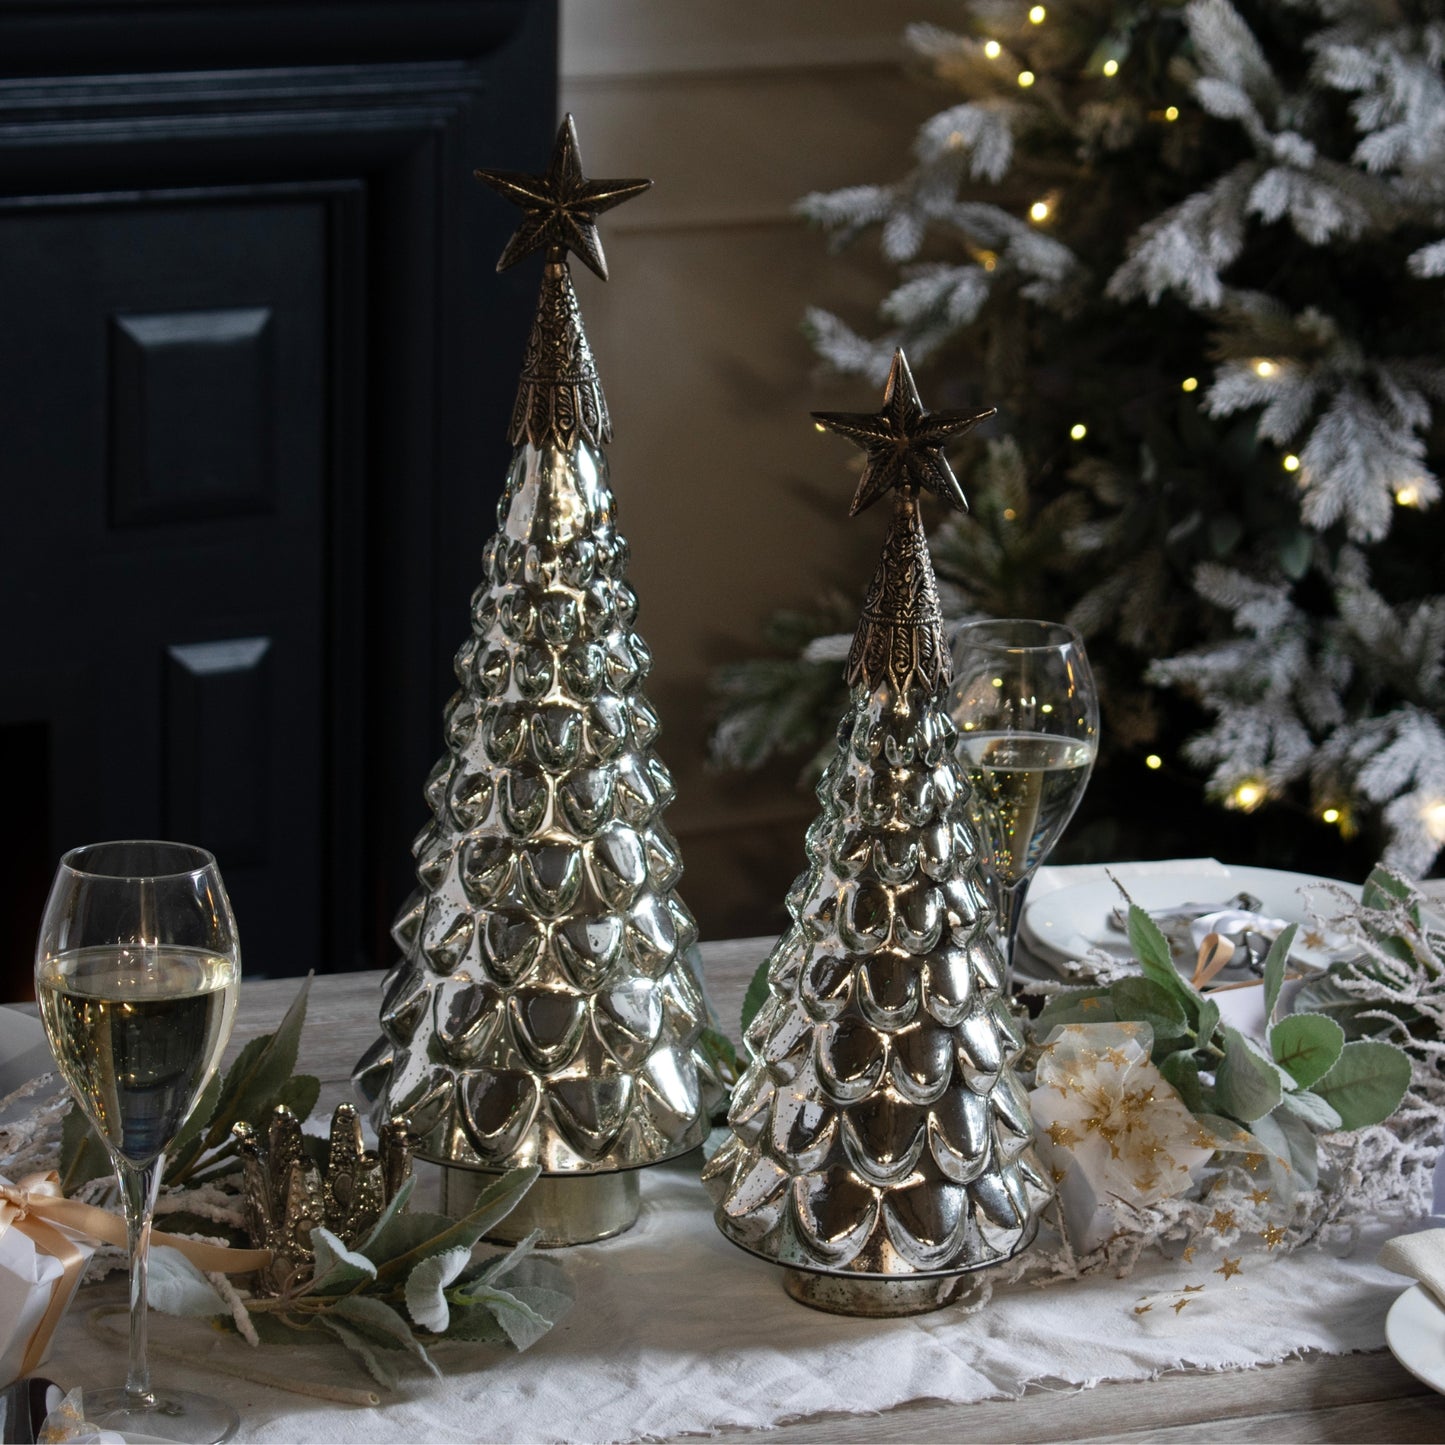 Noel Collection Textured Star Topped Decorative Small Tree